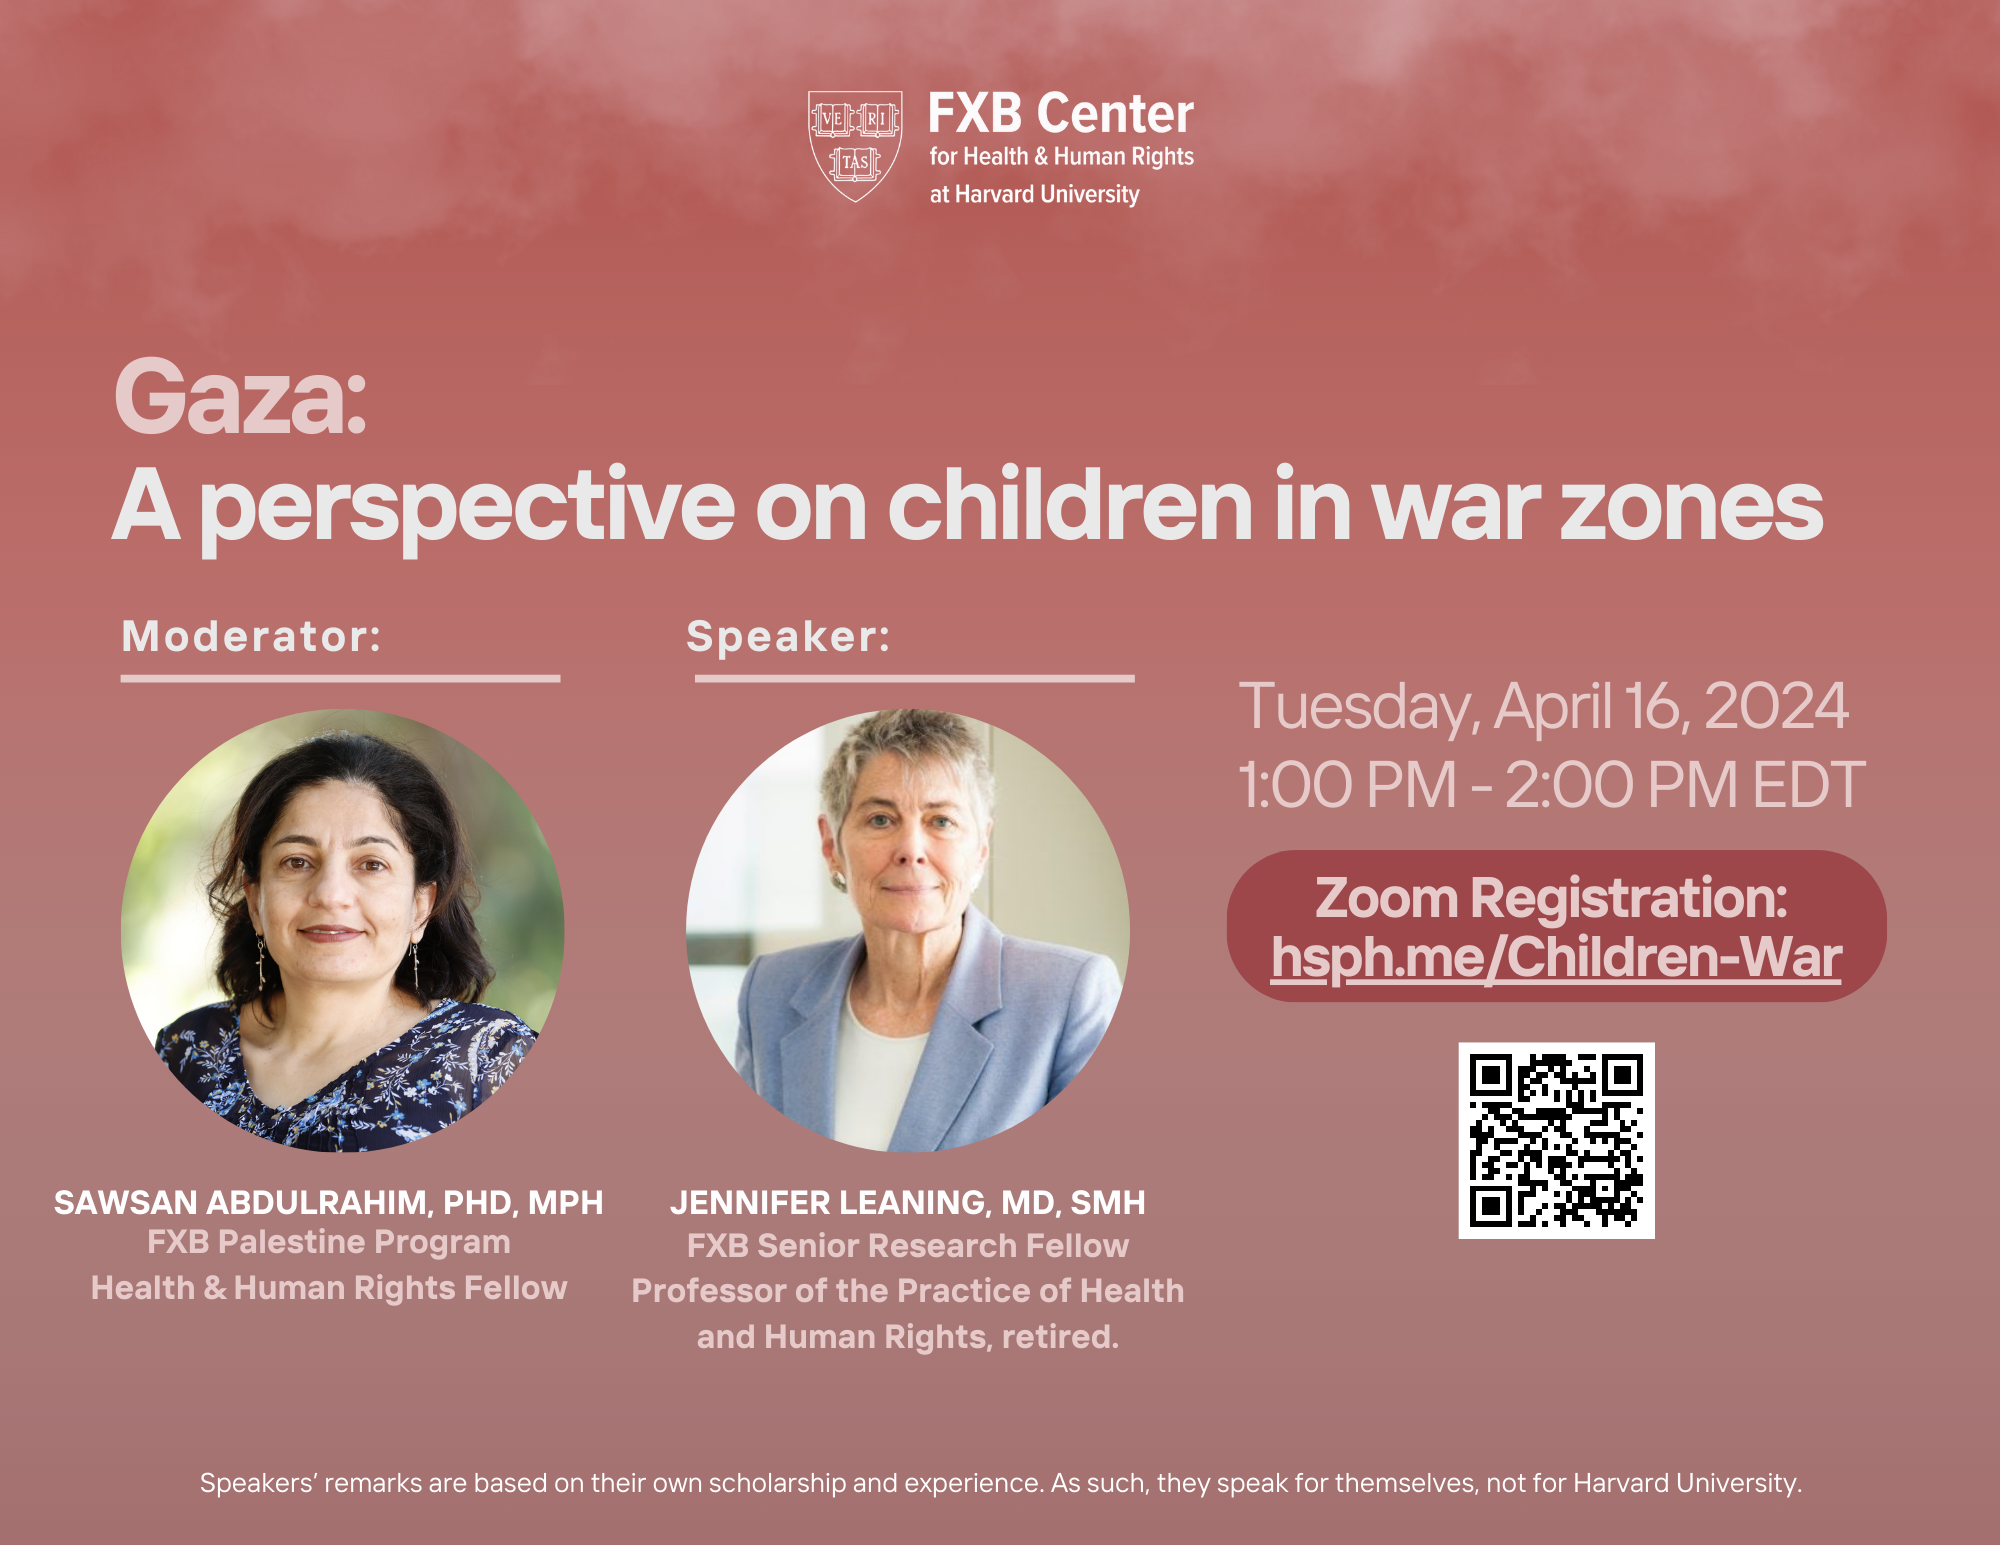 FXB Center logo. Gaza: A perspective on children in war zones. Moderator: Sawsan Abdulrahim, PhD, MPH, FXB Palestine Program Health & Human Rights Fellow. Jennifer Leaning, MD, SMH, FXB Senior Research Fellow, Professor of the Practice of Health and Human Rights, retired. Tuesday, April 16, 2024, 1pm-2pm EDT.